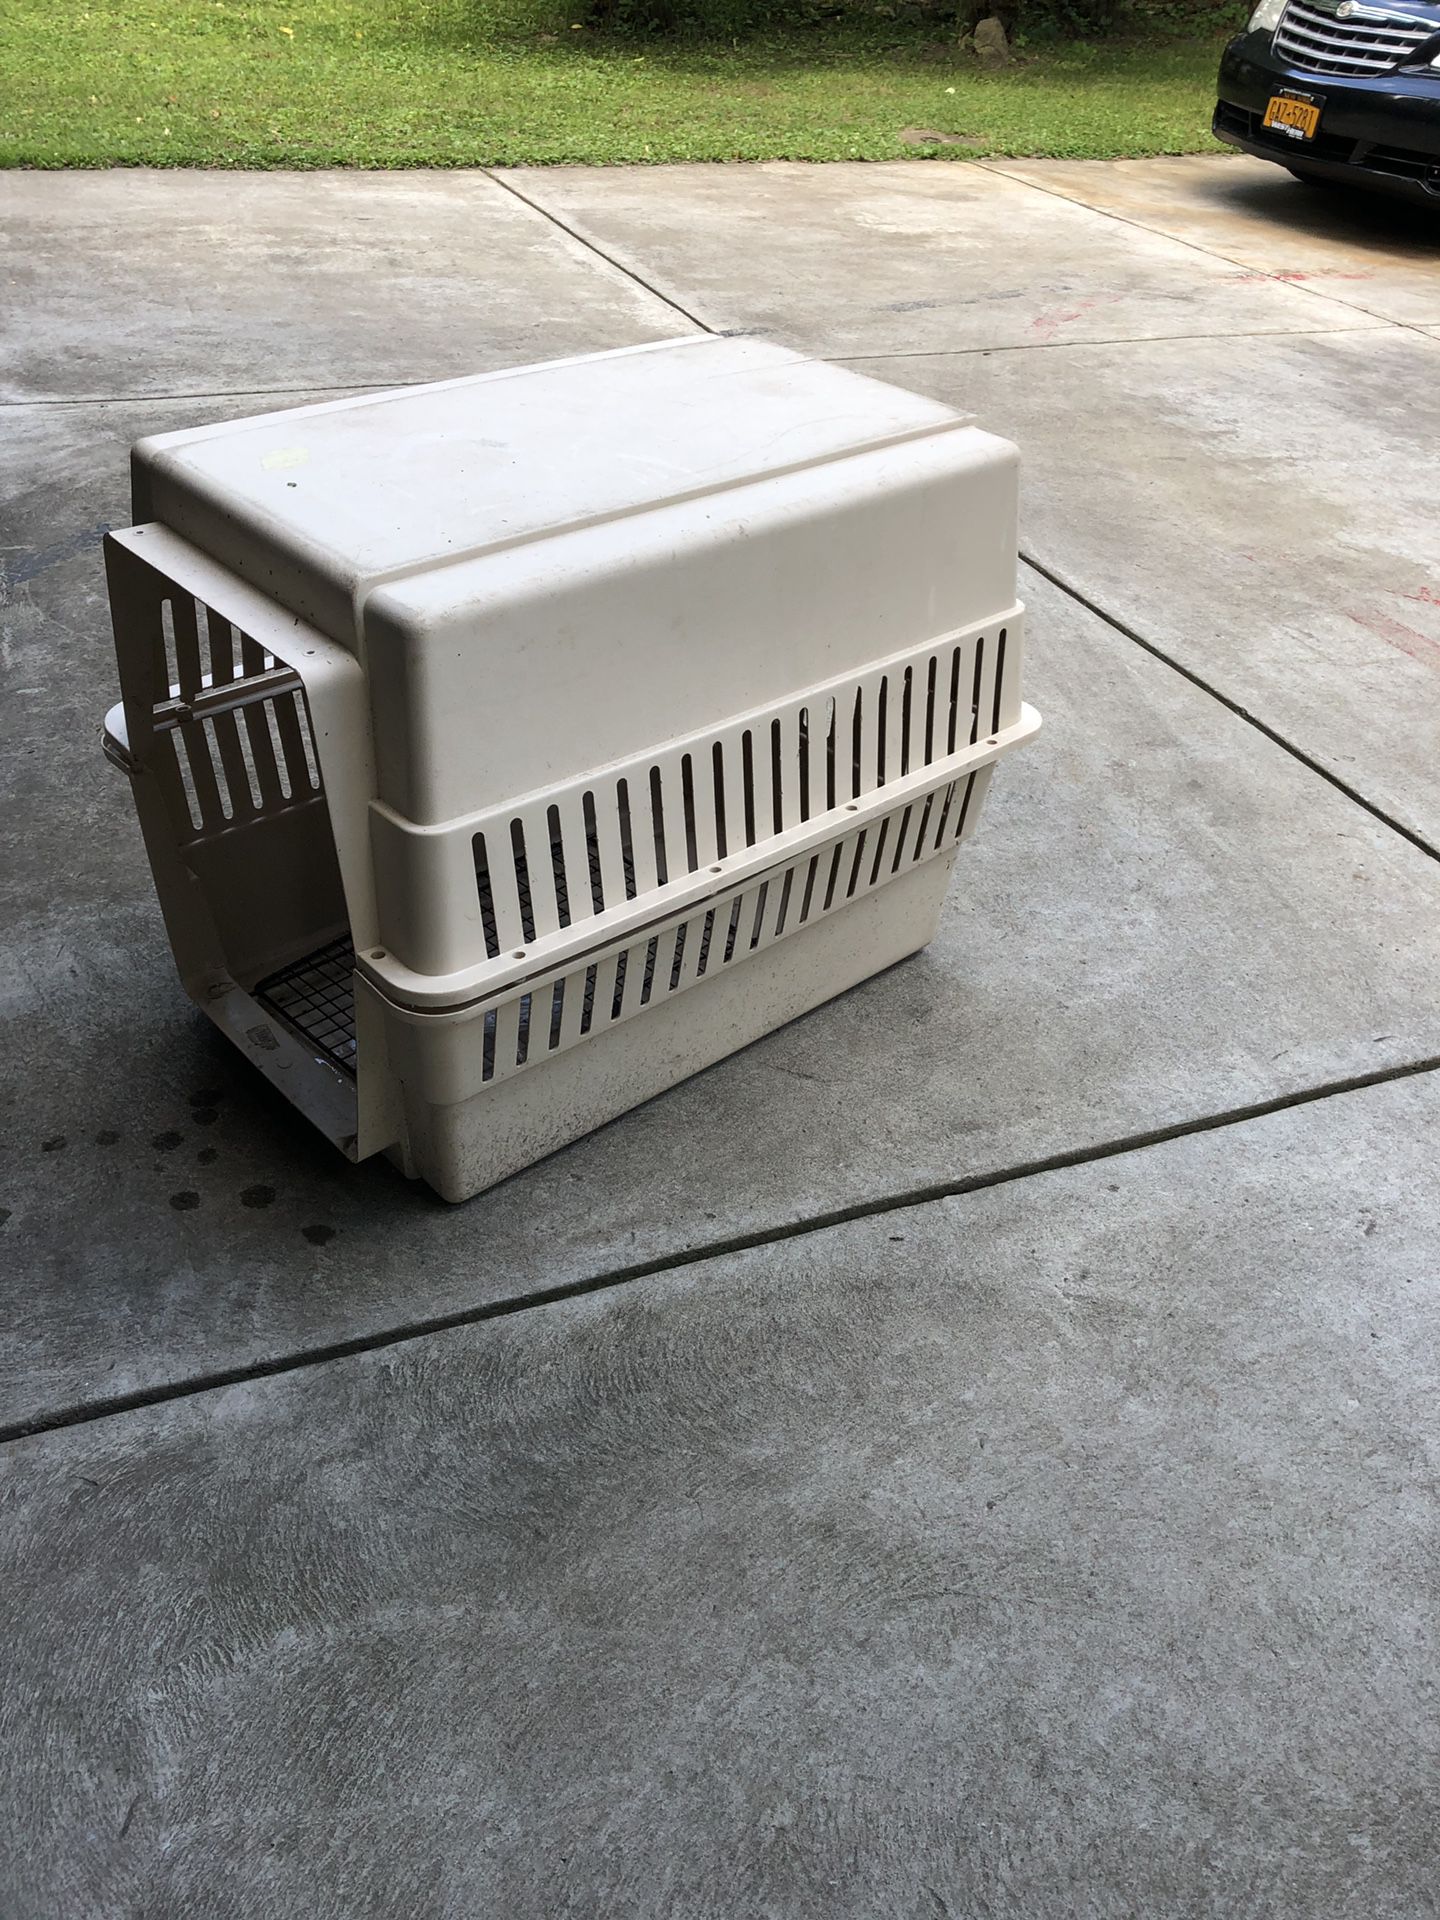 Dog crate for large dog